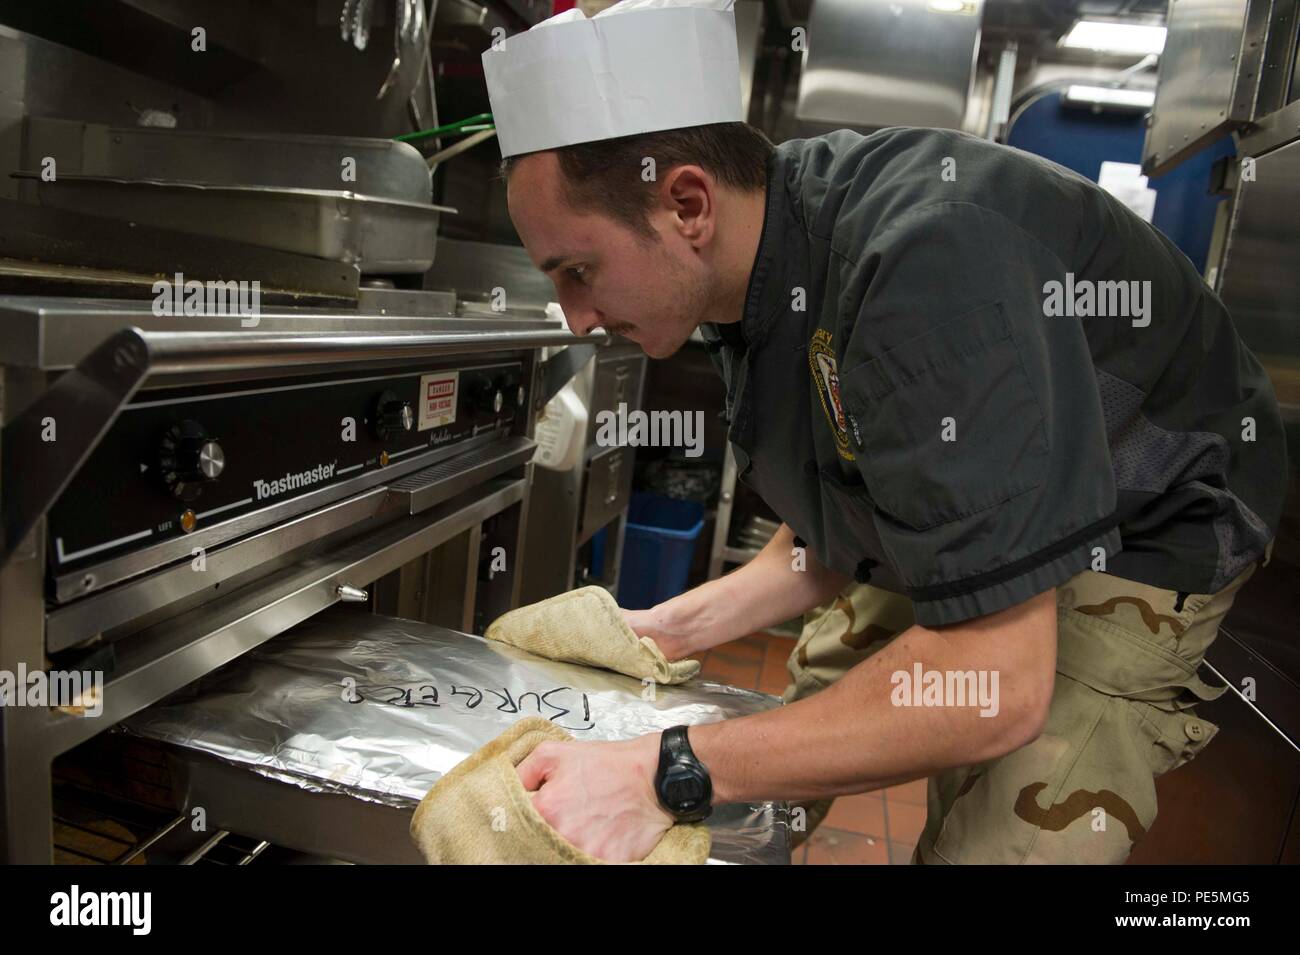 150923-N-FI568-059 GULF OF ADEN (Sept. 23, 2015) – Culinary Specialist 2nd Class Justin Graham, from Cincinnati, Ohio, prepares hamburgers in the wardroom galley aboard the Arleigh Burke-class guided missile destroyer USS Winston S. Churchill (DDG 81). USS Winston S. Churchill is deployed in the U.S. 5th Fleet area of operations supporting Operation Inherent Resolve, strike operations and theater security cooperation efforts in the region. (U.S. Navy photo by Mass Communication Specialist 3rd Class Taylor L. Jackson/Released) Stock Photo